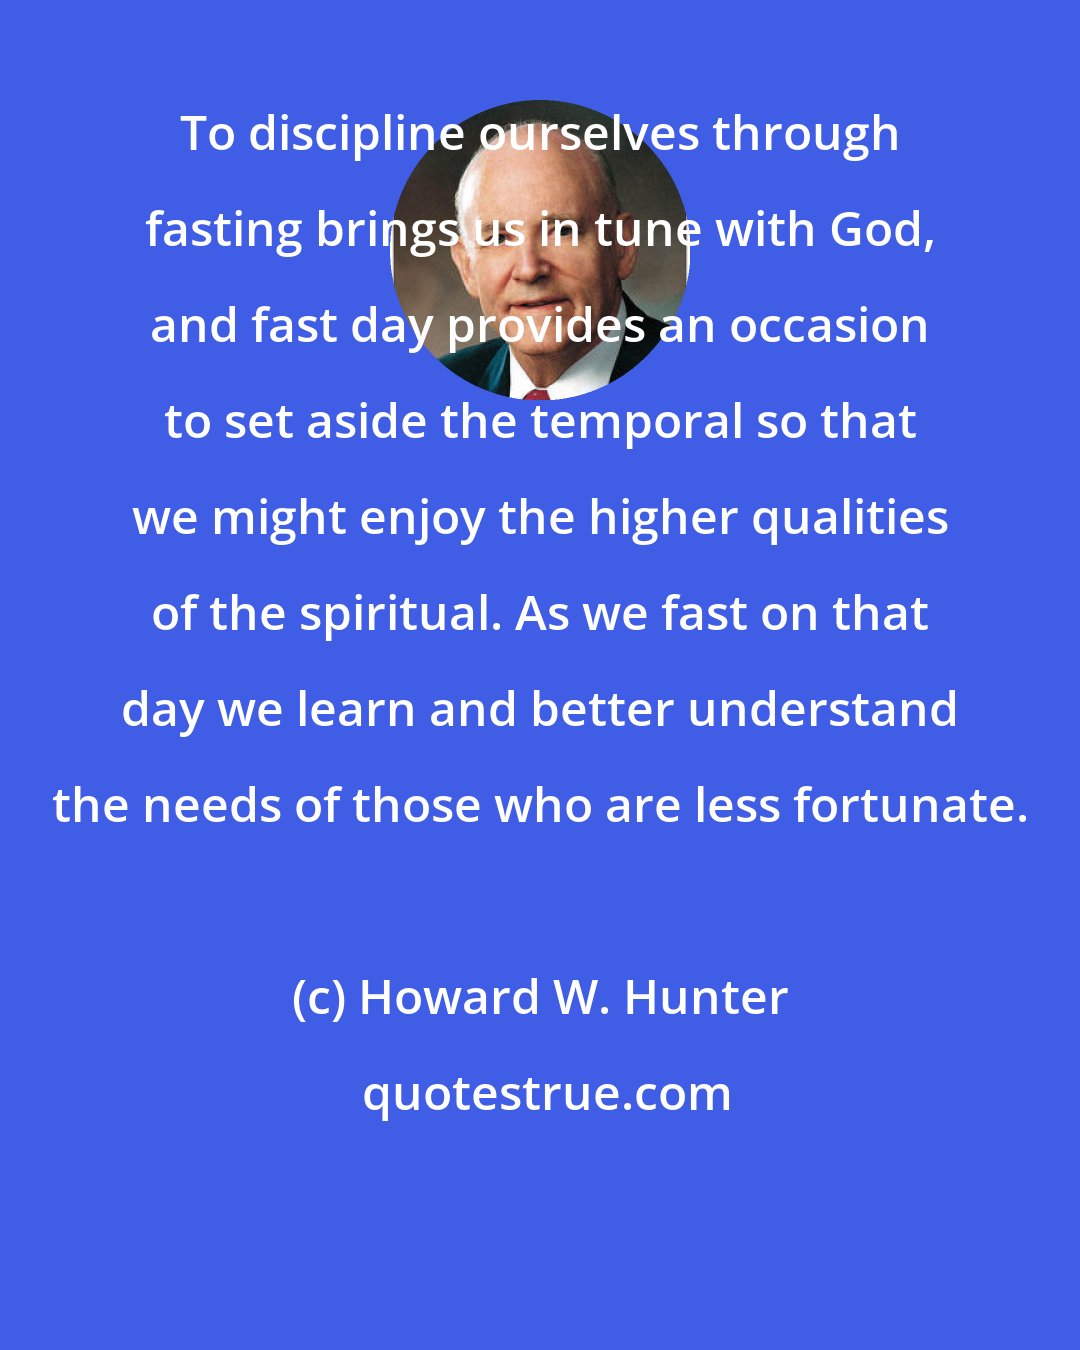 Howard W. Hunter: To discipline ourselves through fasting brings us in tune with God, and fast day provides an occasion to set aside the temporal so that we might enjoy the higher qualities of the spiritual. As we fast on that day we learn and better understand the needs of those who are less fortunate.